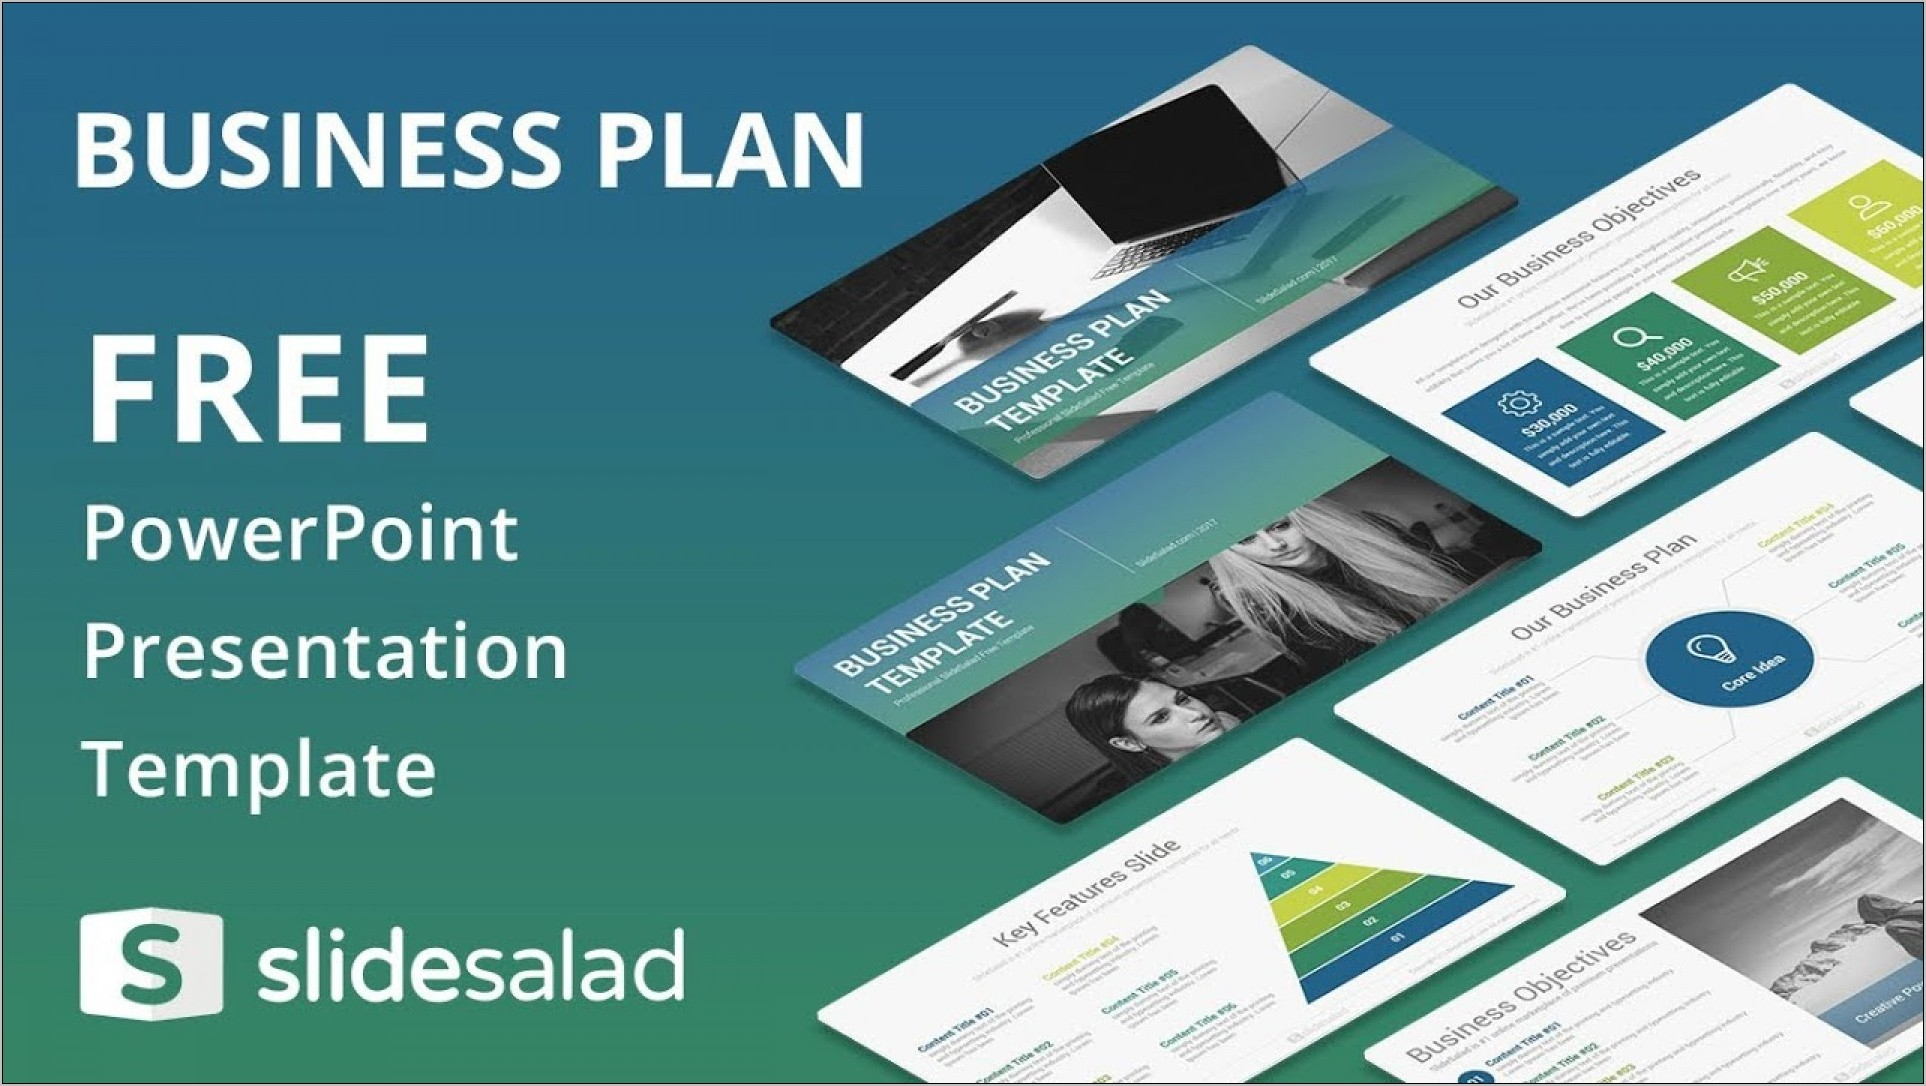 Business Plan Template Free Ppt